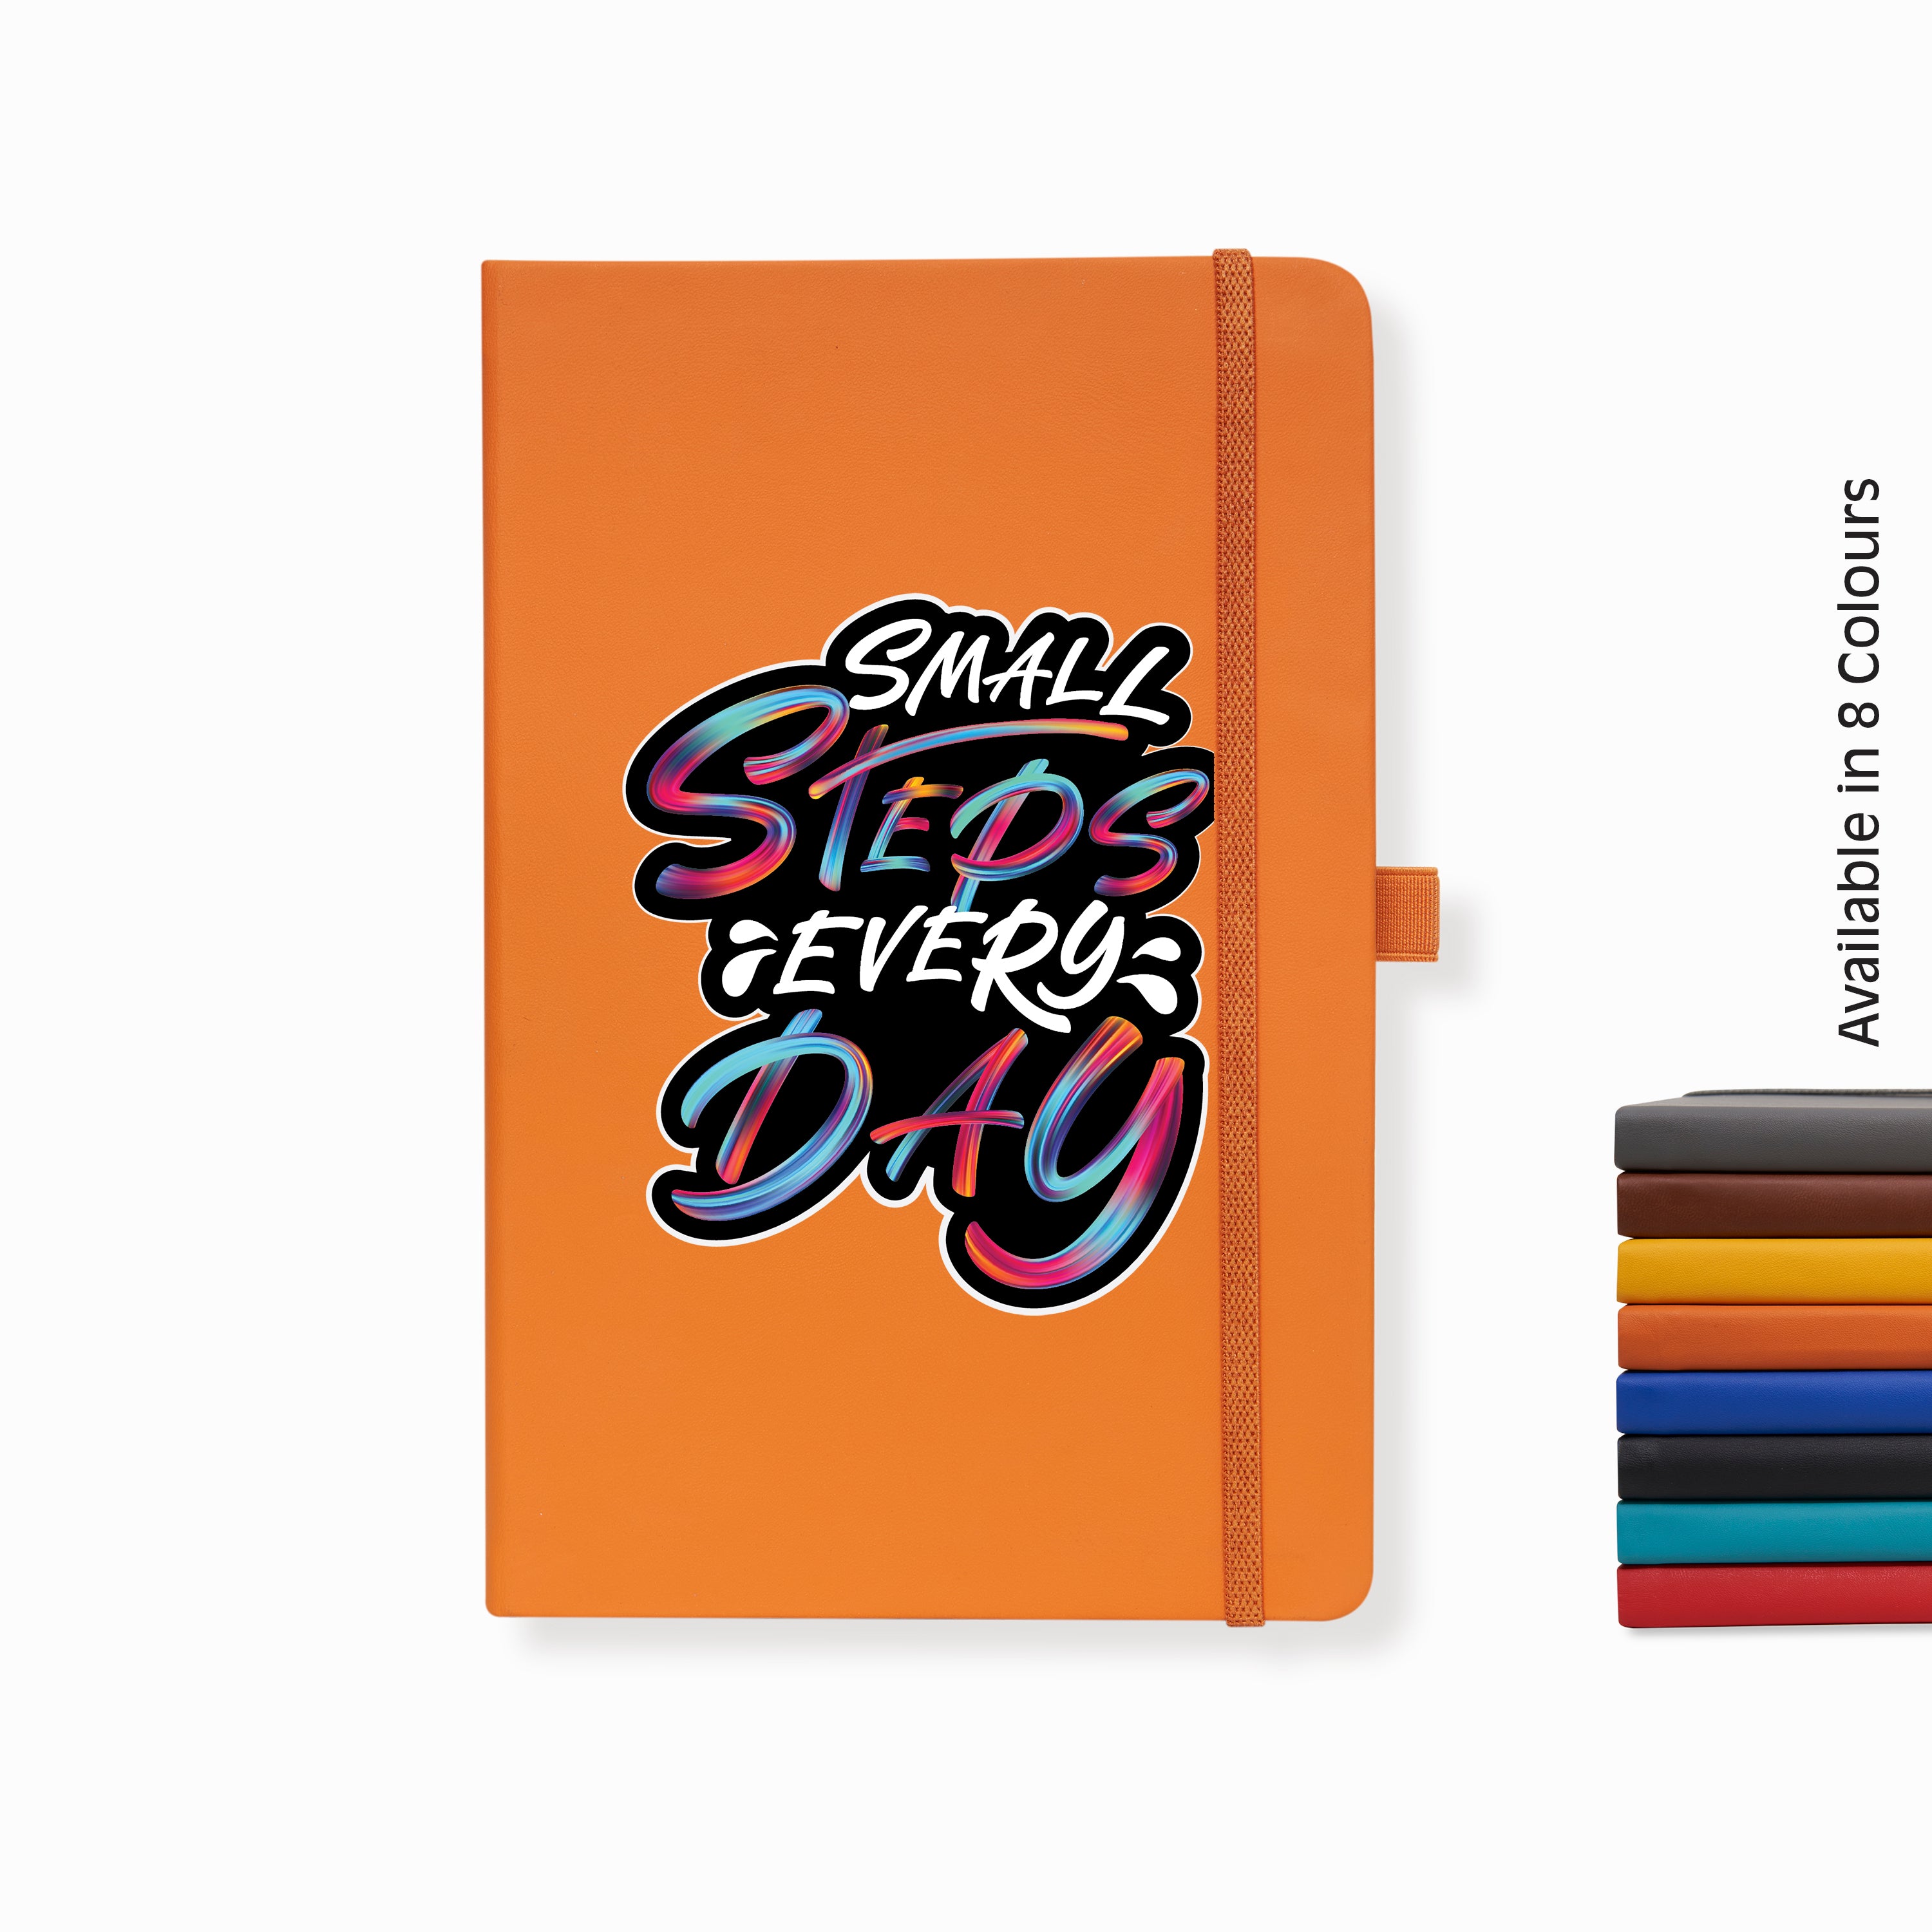 Pro Series Executive A5 PU Leather Hardbound Ruled Orange Notebook with Pen Loop [Small Steps Every Day]